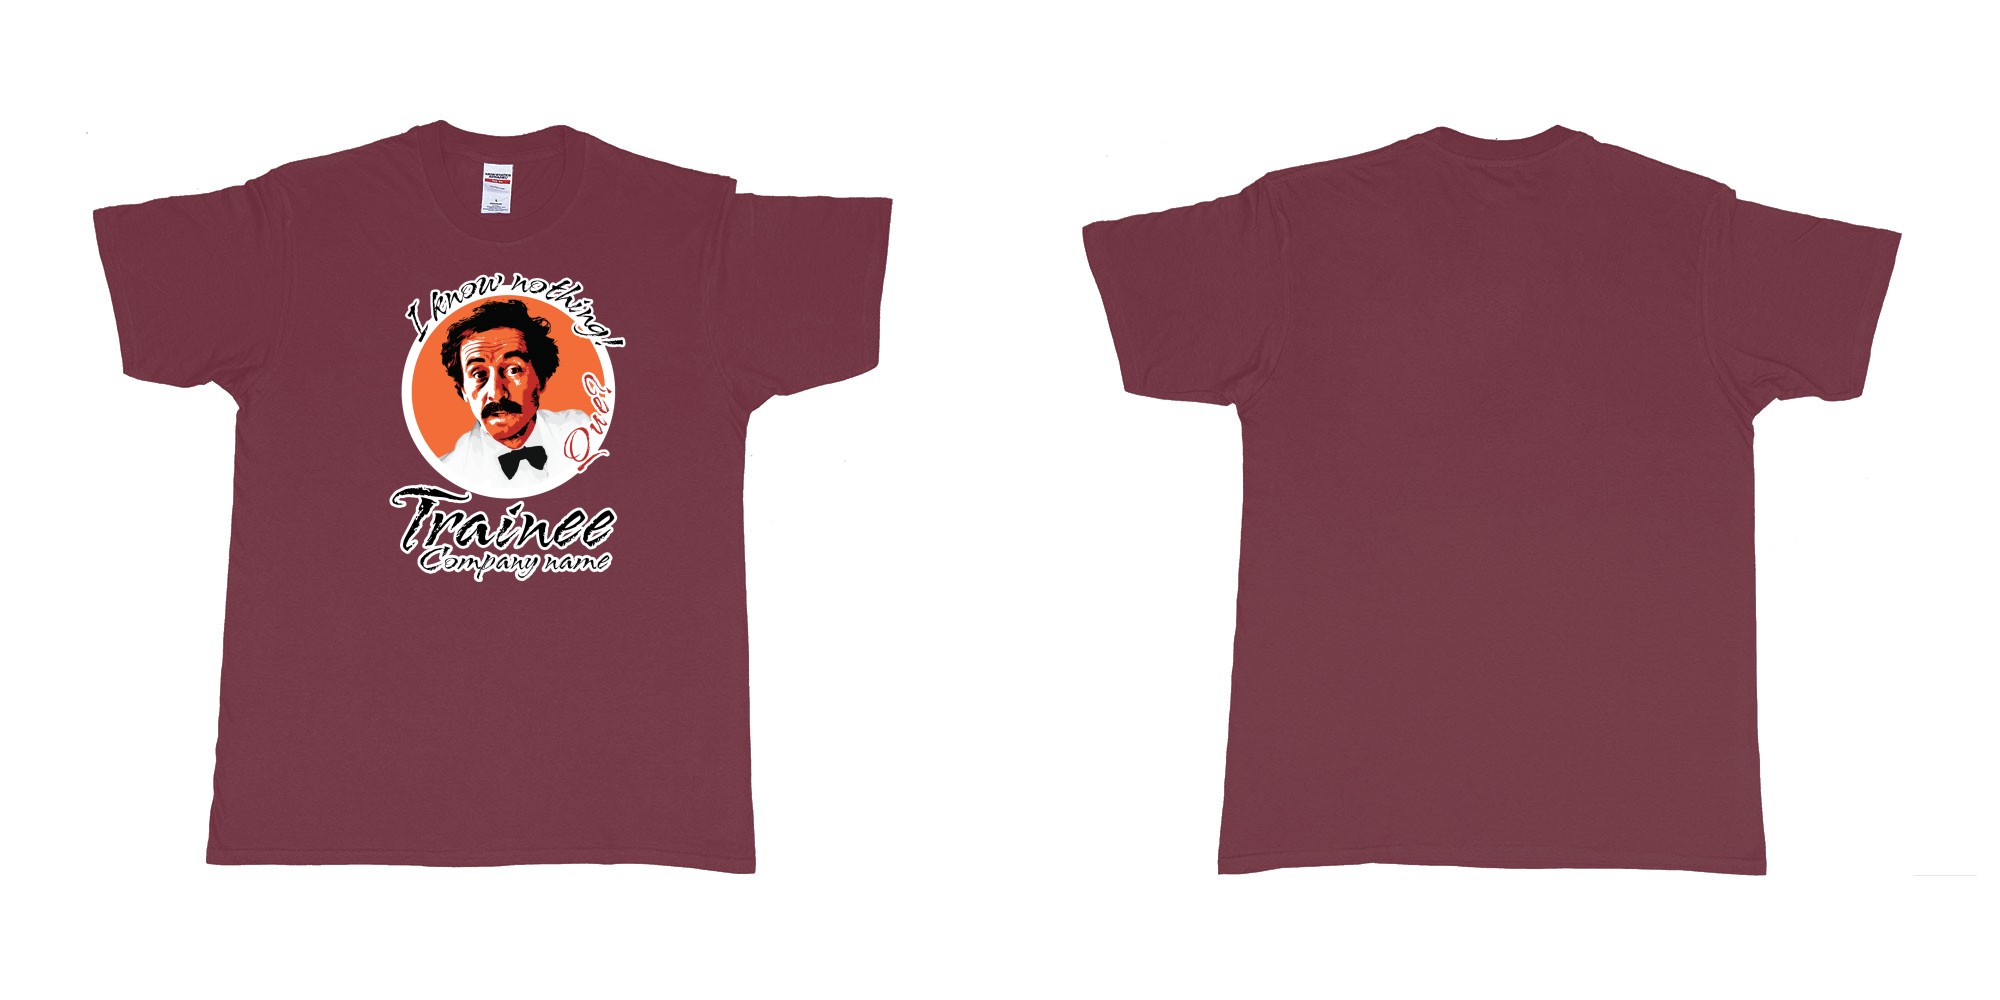 Custom tshirt design fawlty towers manuel i know nothing que in fabric color marron choice your own text made in Bali by The Pirate Way